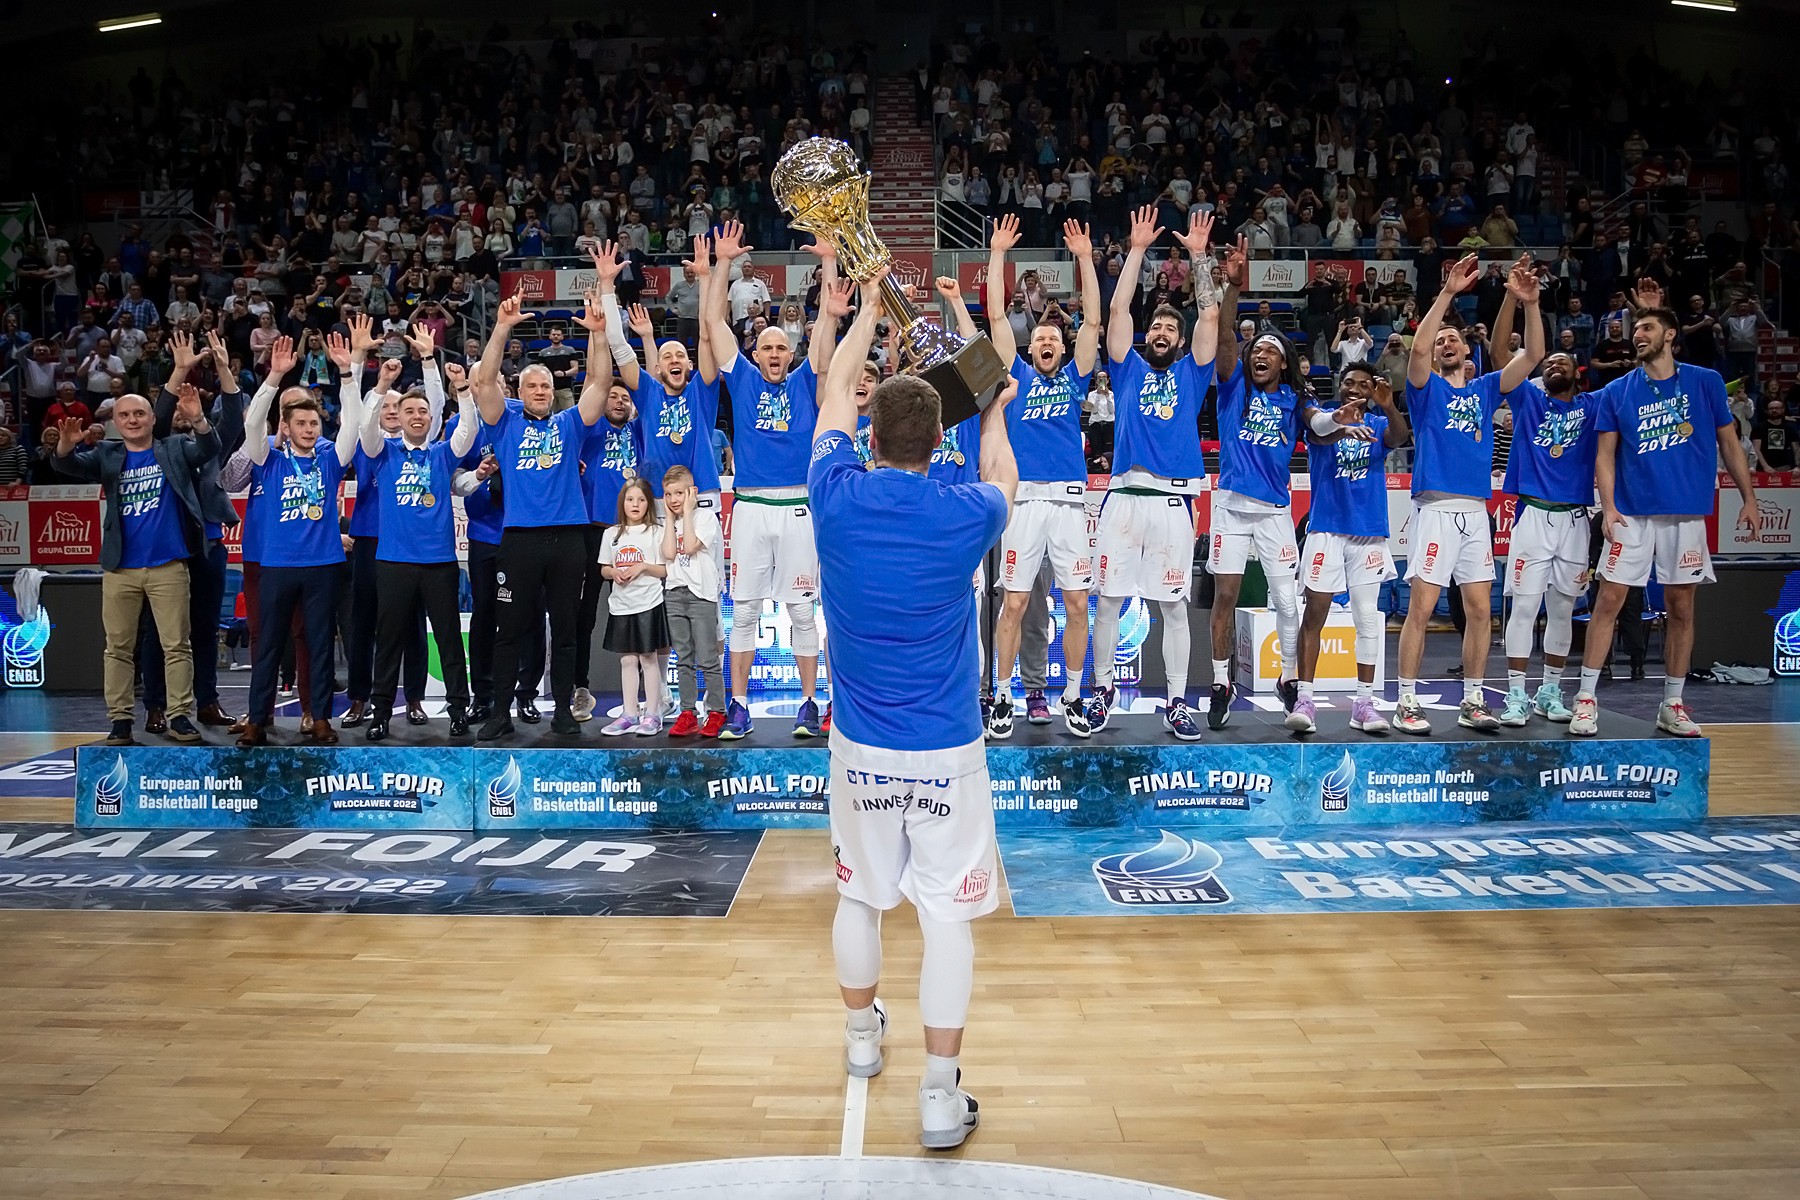 Historic Moment - The Rottweilers Wins European North Basketball League!